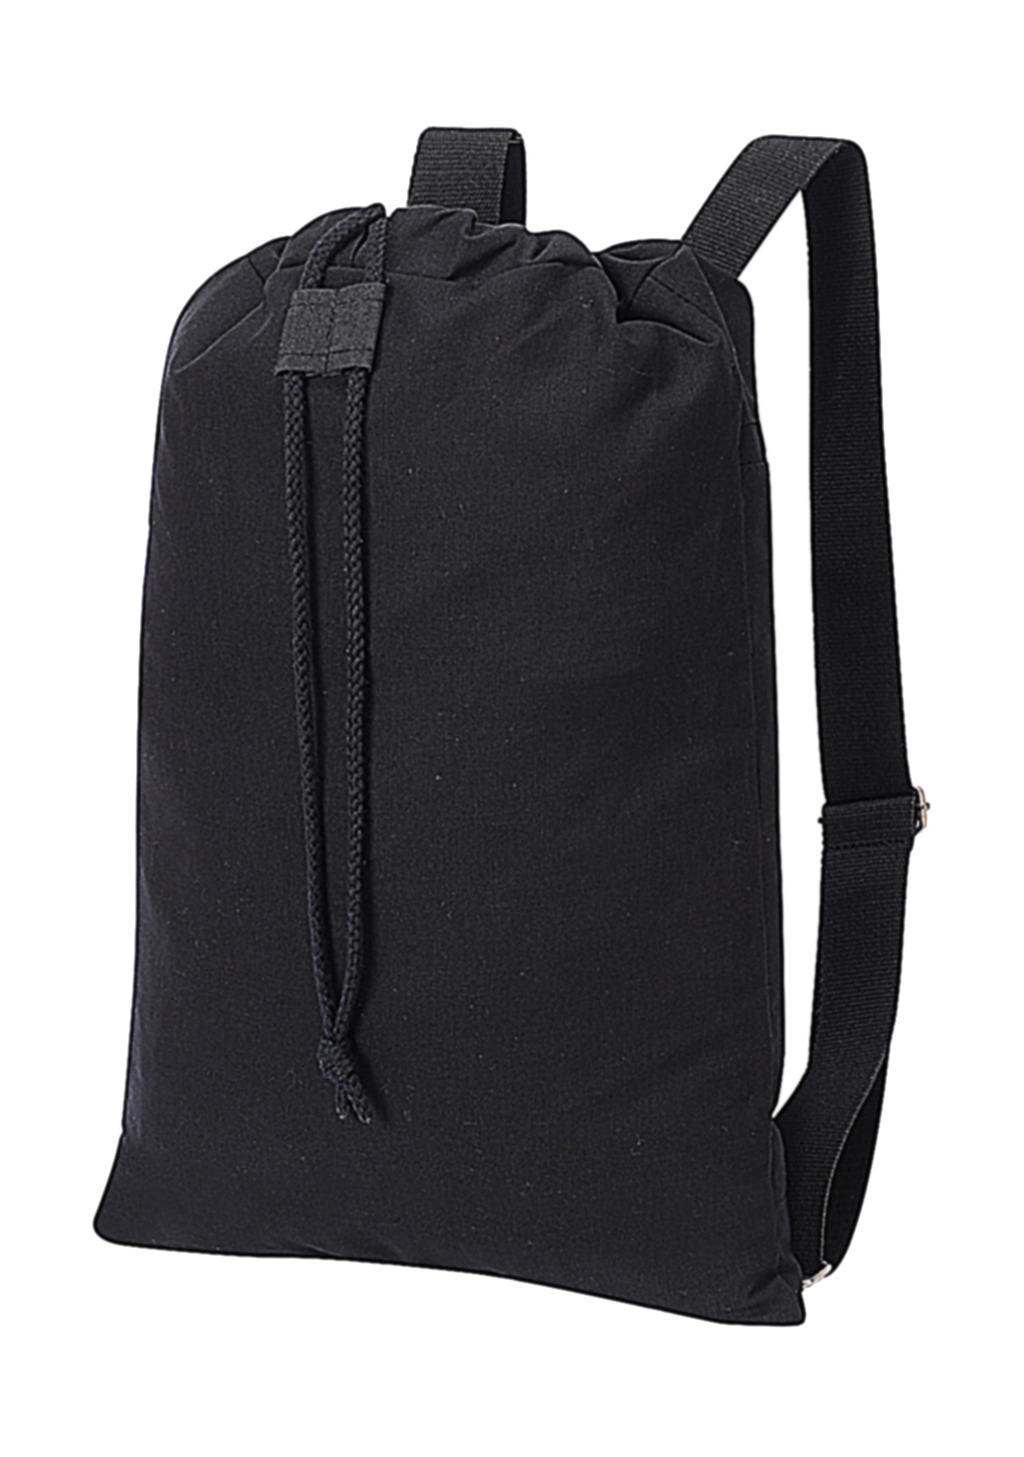  Sheffield Cotton Drawstring Backpack in Farbe Black Washed